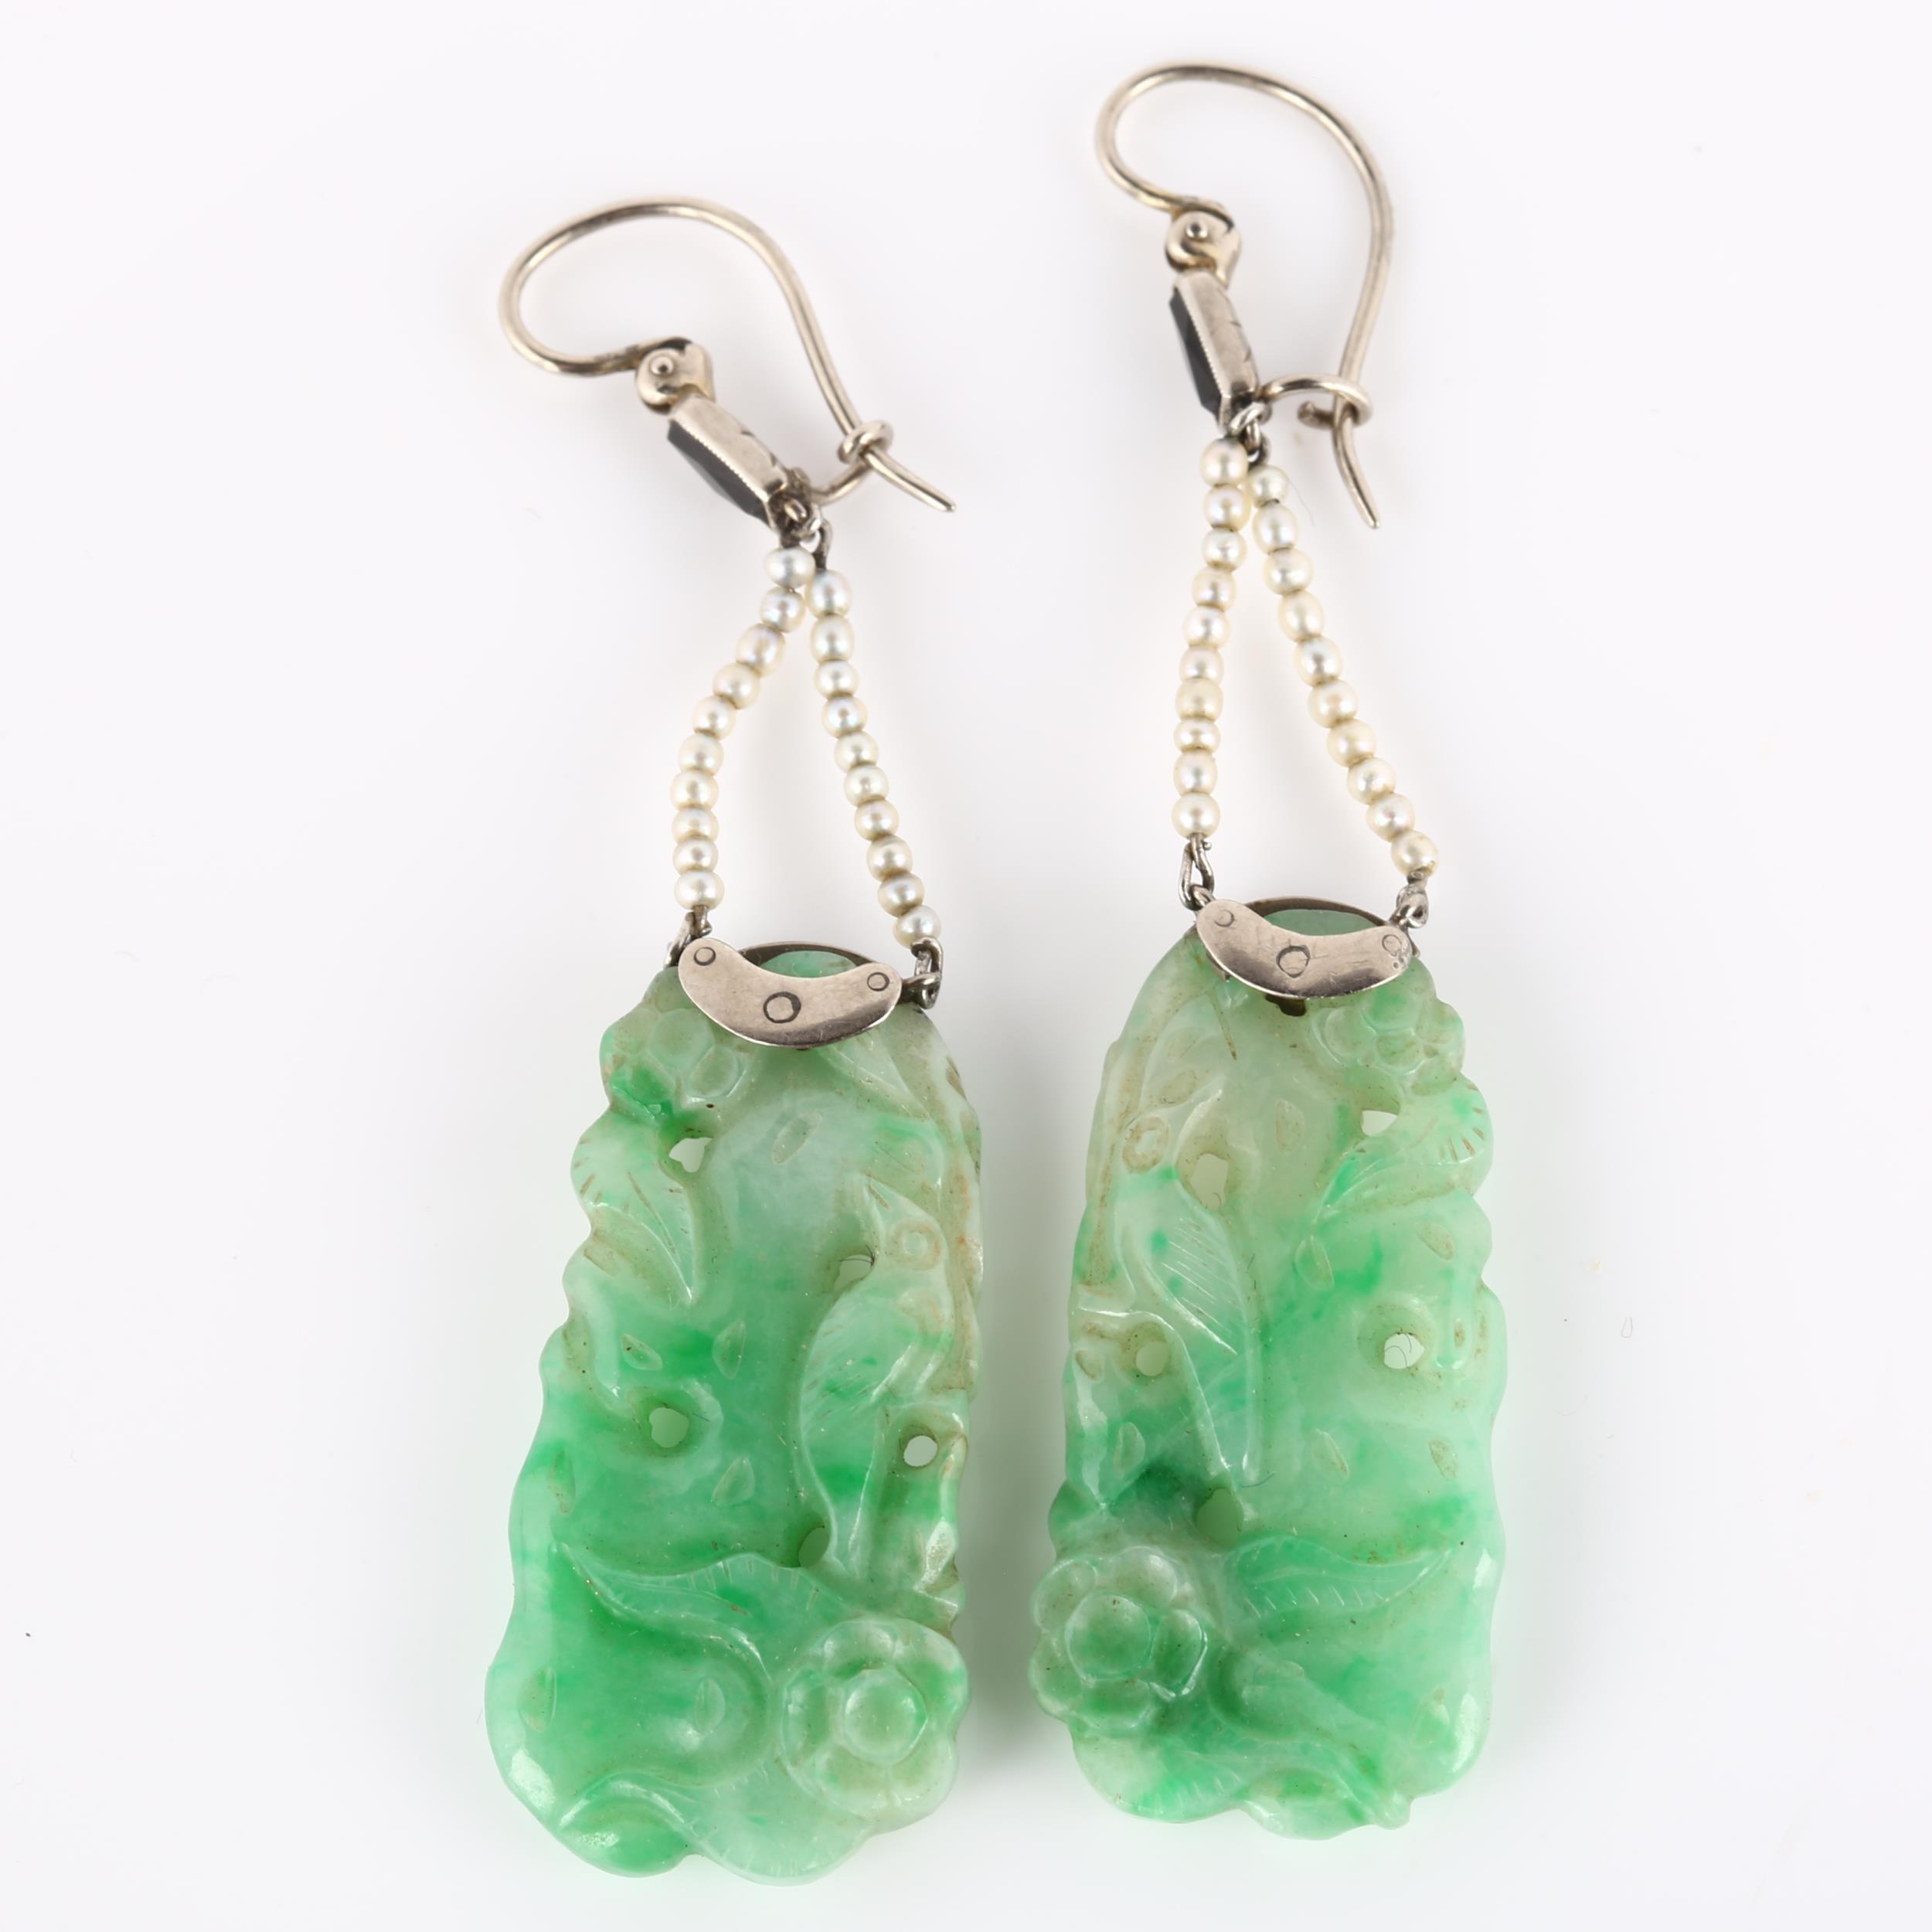 A pair of Art Deco jade onyx and seed pearl drop earrings, with carved and polished jade panels - Image 3 of 4